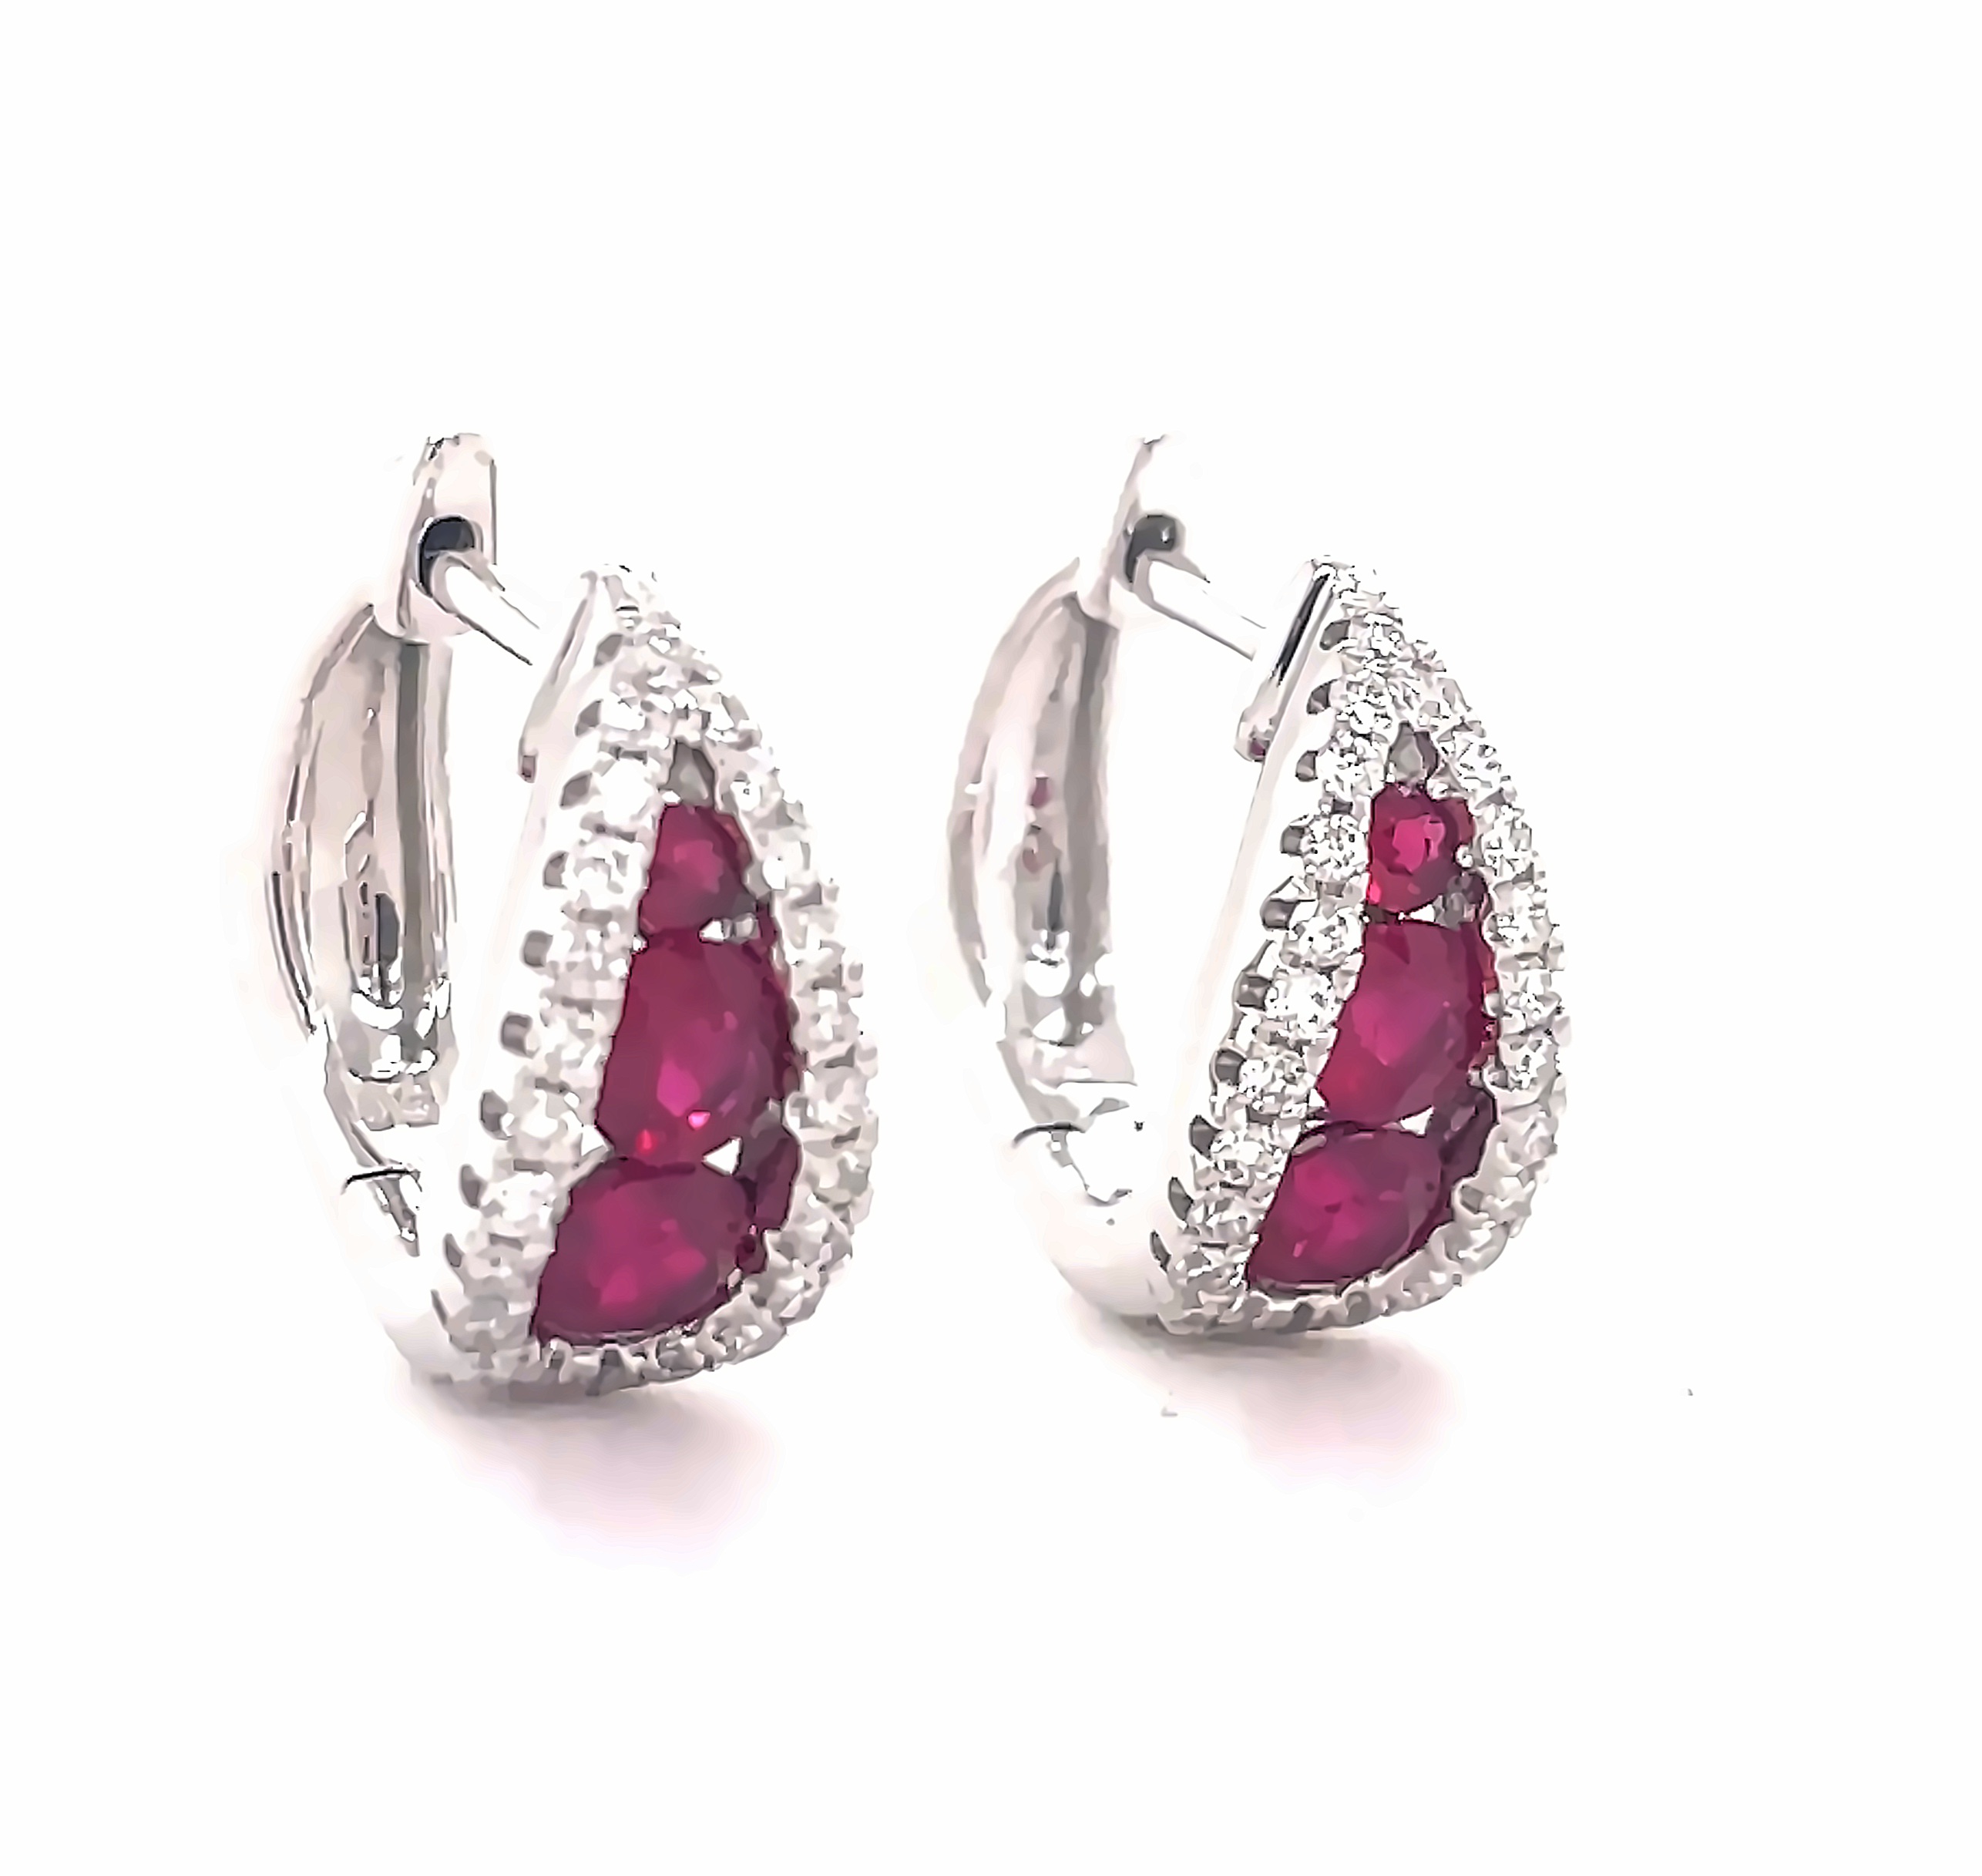 Everyday diamond hoop earrings.   18k white gold  Modern style.  Secure hinge system  Round diamonds 0.90 cts  Three graduated rubies 0.71 cts  F/G color  13.00 x 14.00 mm long.